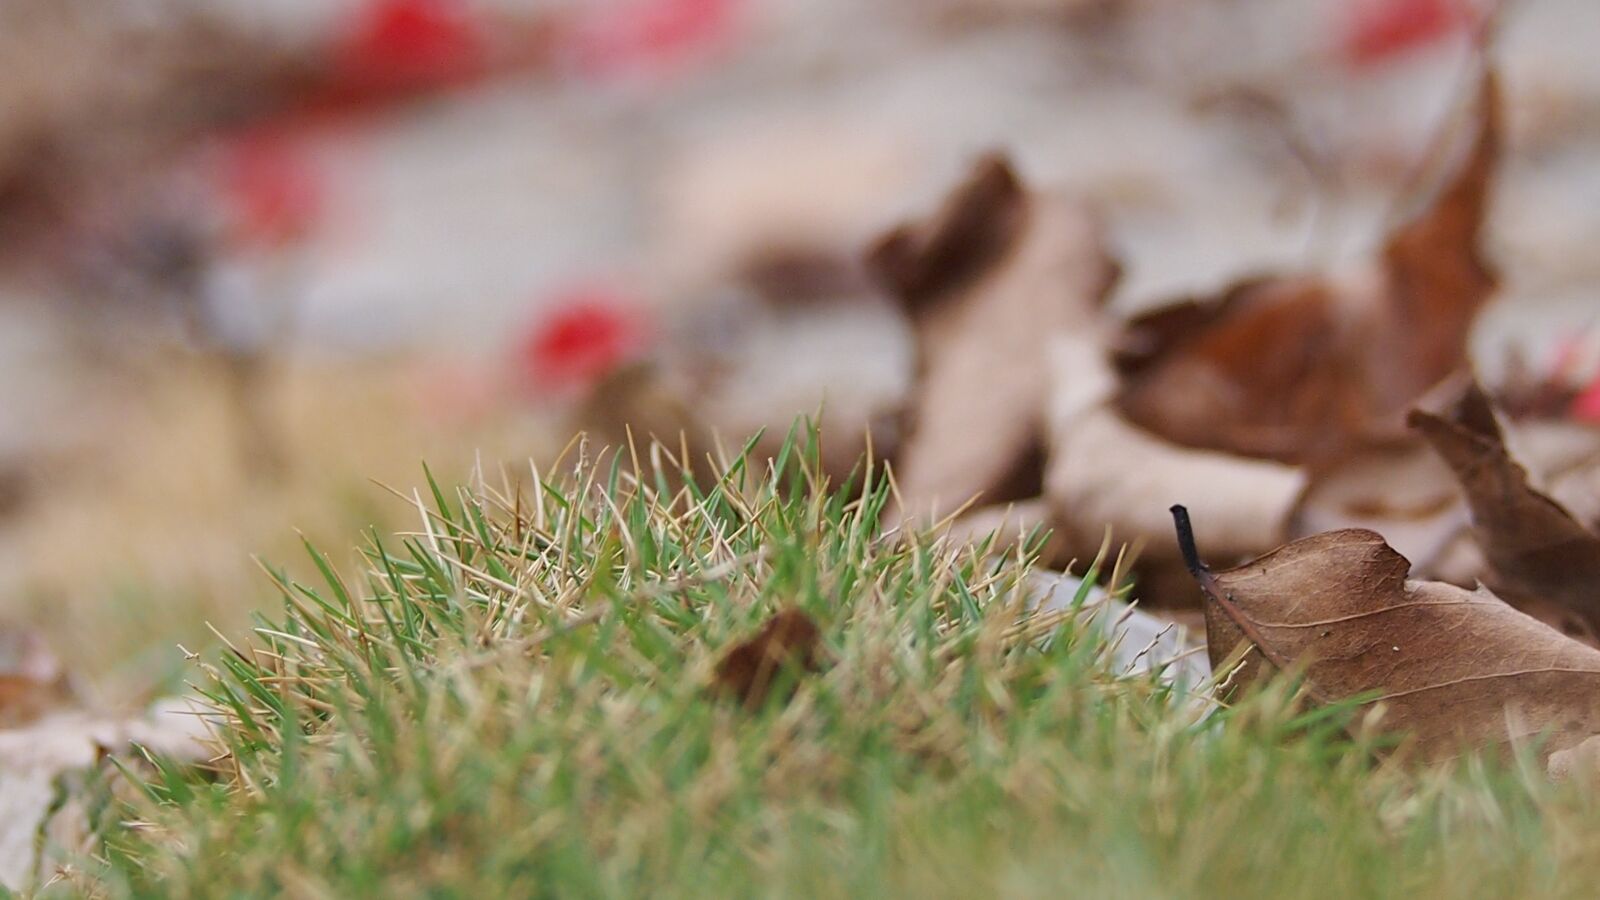 Olympus PEN E-P3 sample photo. Dead leaves, grass, natural photography